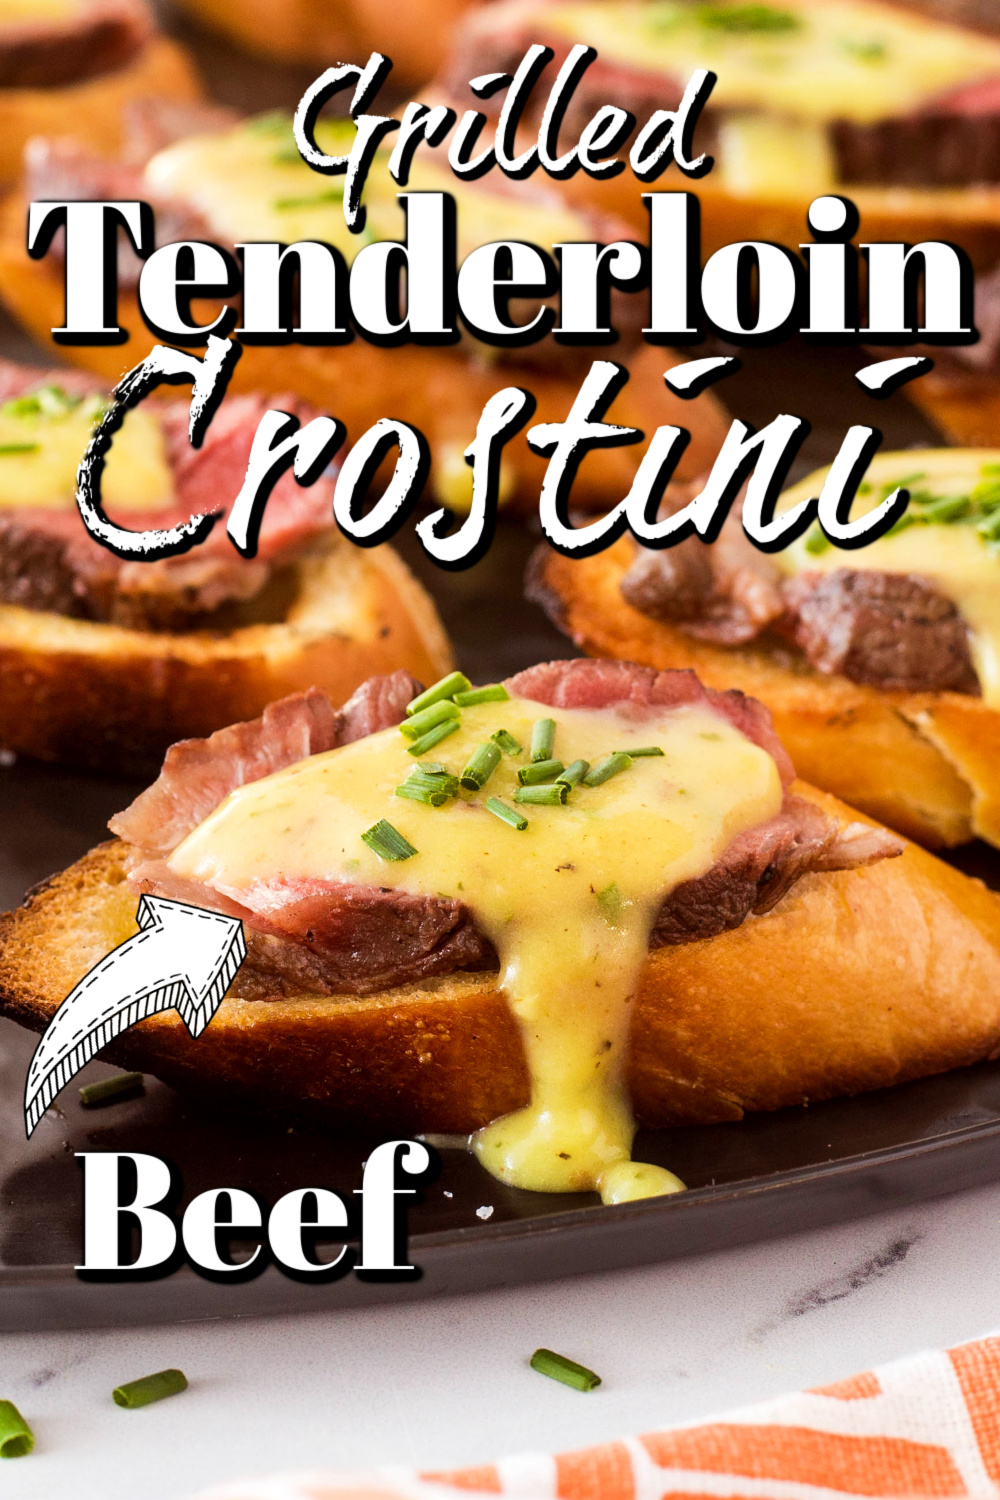 These tenderloin beef crostini appetizers are simply amazing. They will be the hit of your next get-together!